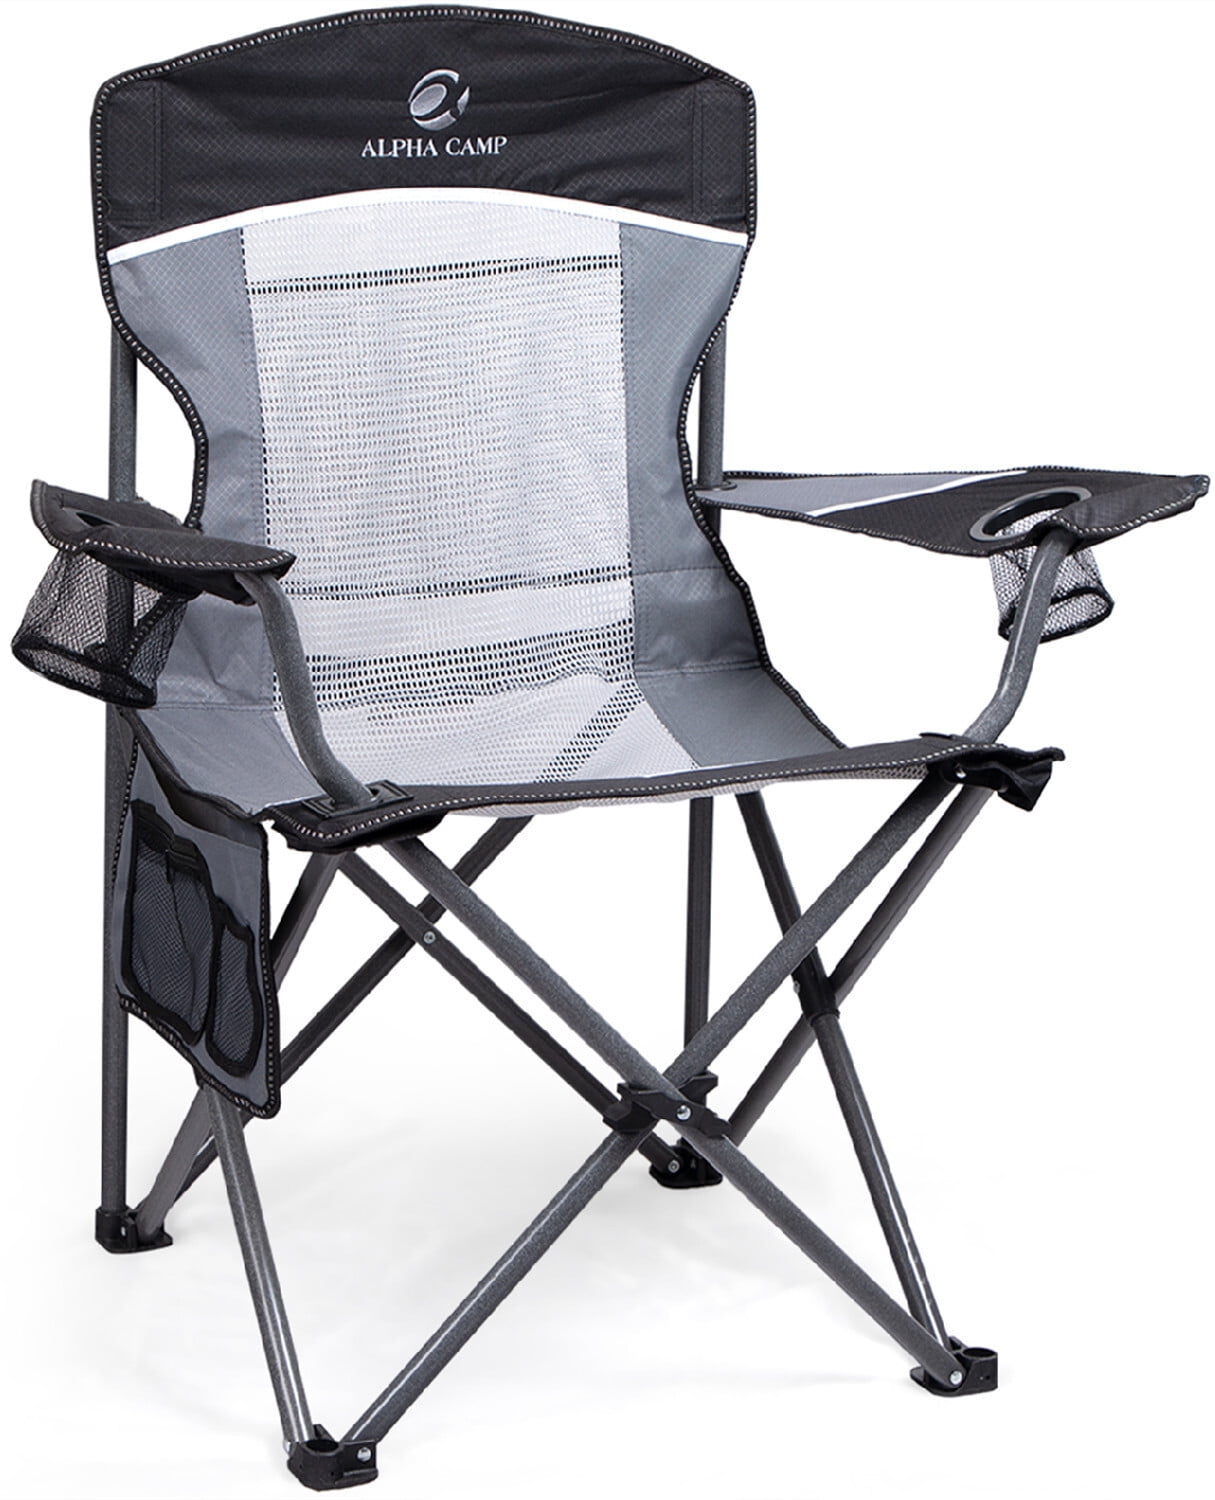 ALPHA CAMP Oversized Portable Folding Camping Chair with Cooler Bag for  Sports, Beach, Hiking, Fishing - Black-Gray